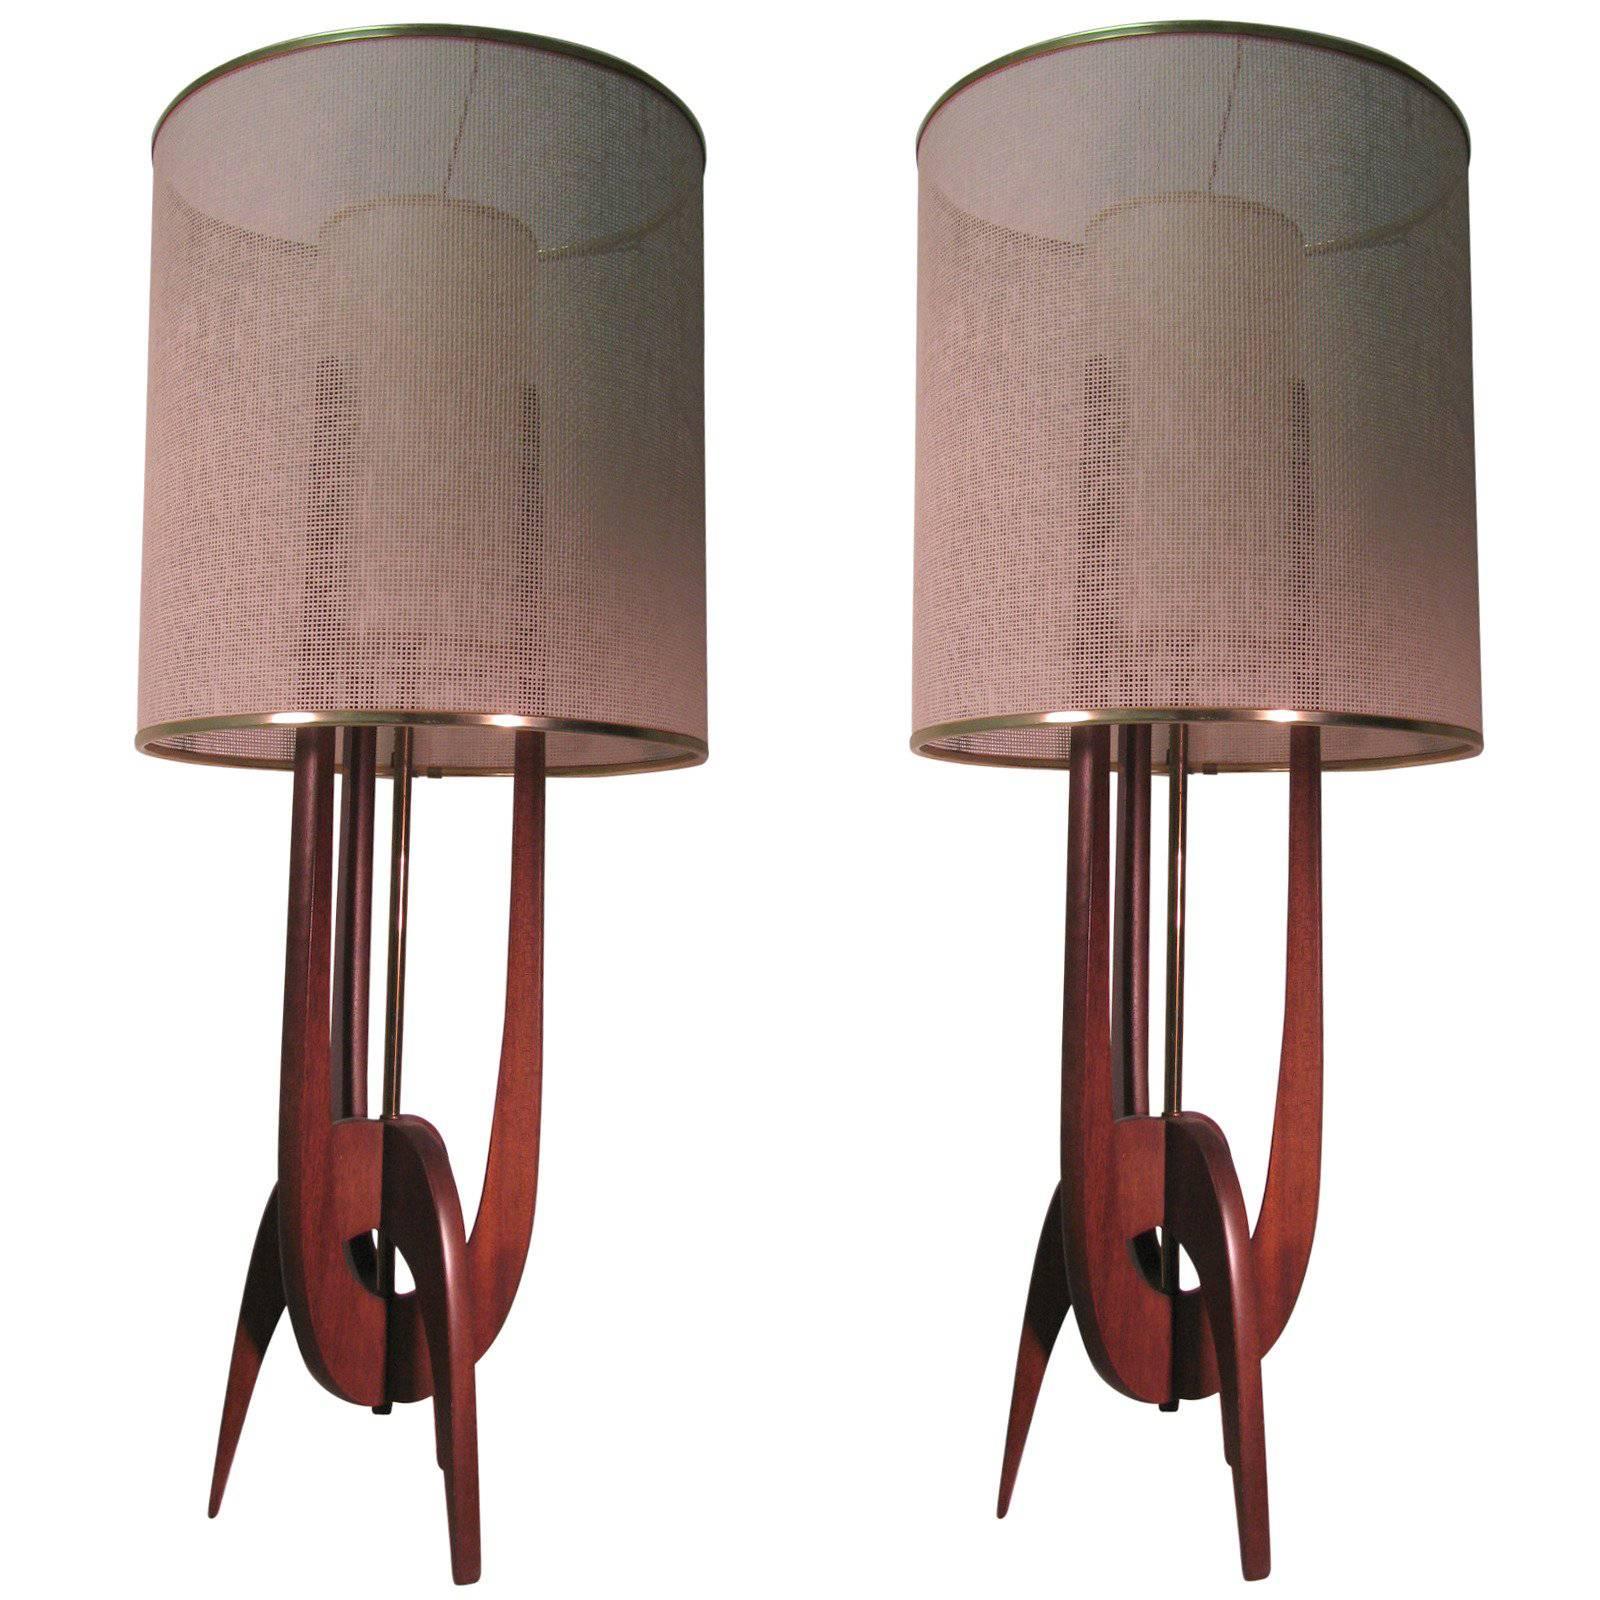 Pair of Mid-Century Modern Adrian Pearsall Table Lamps